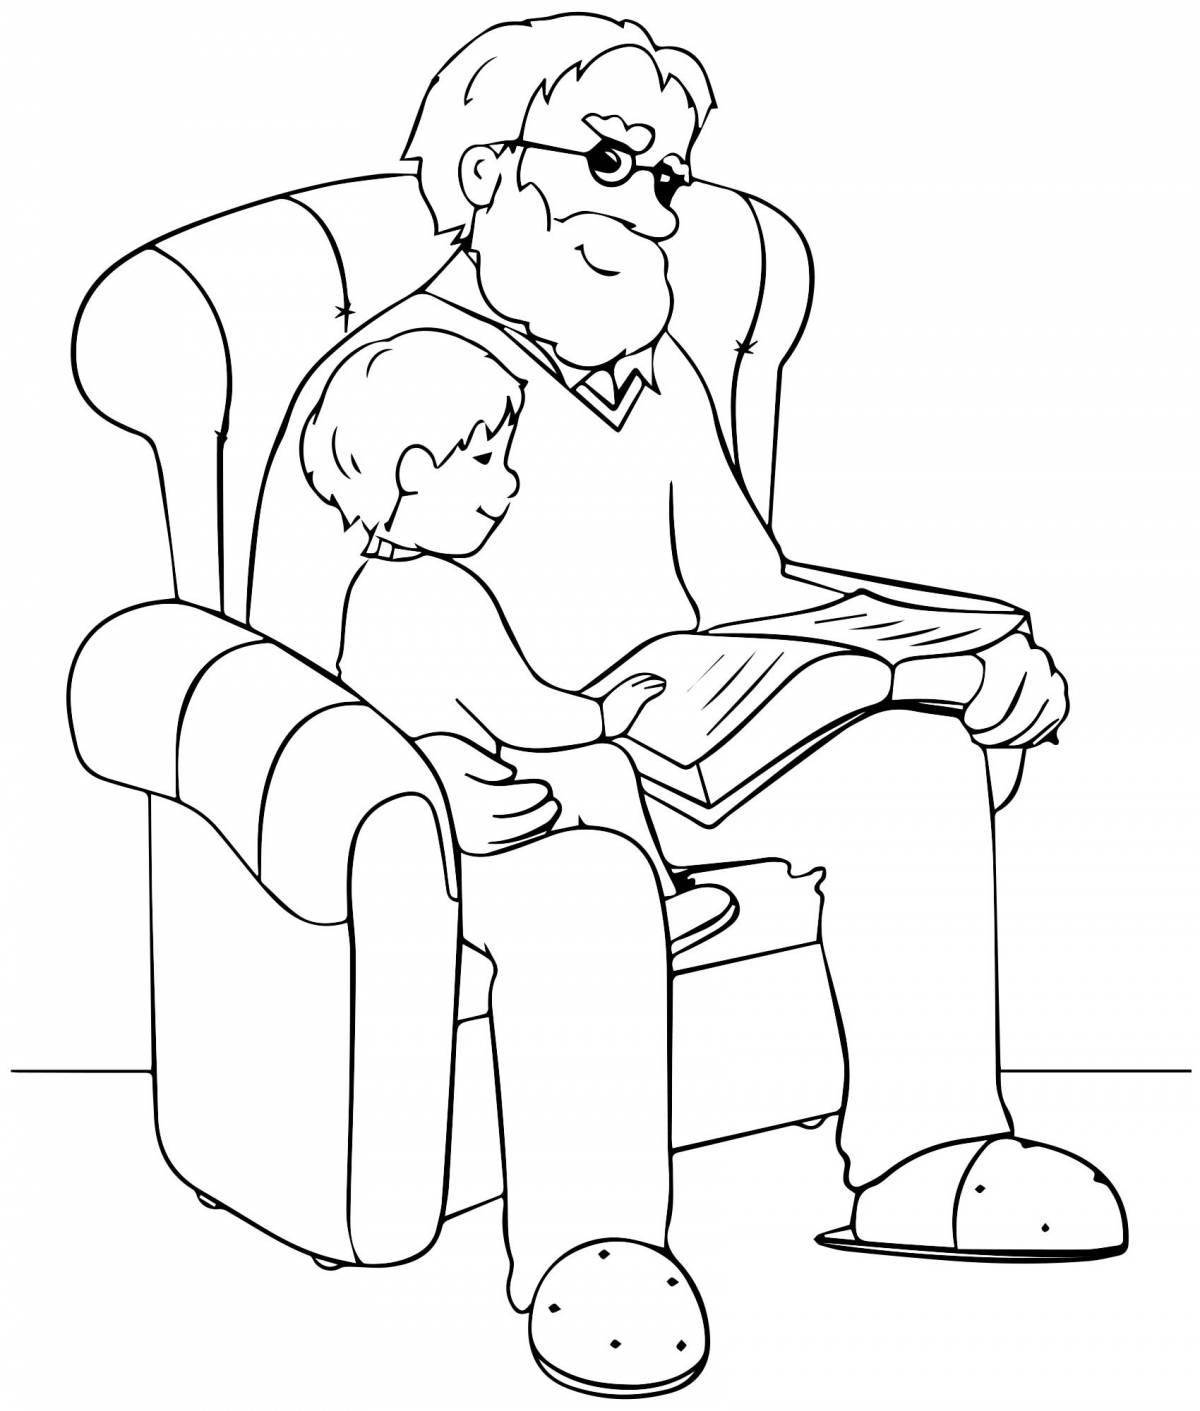 A fun coloring book for the elderly